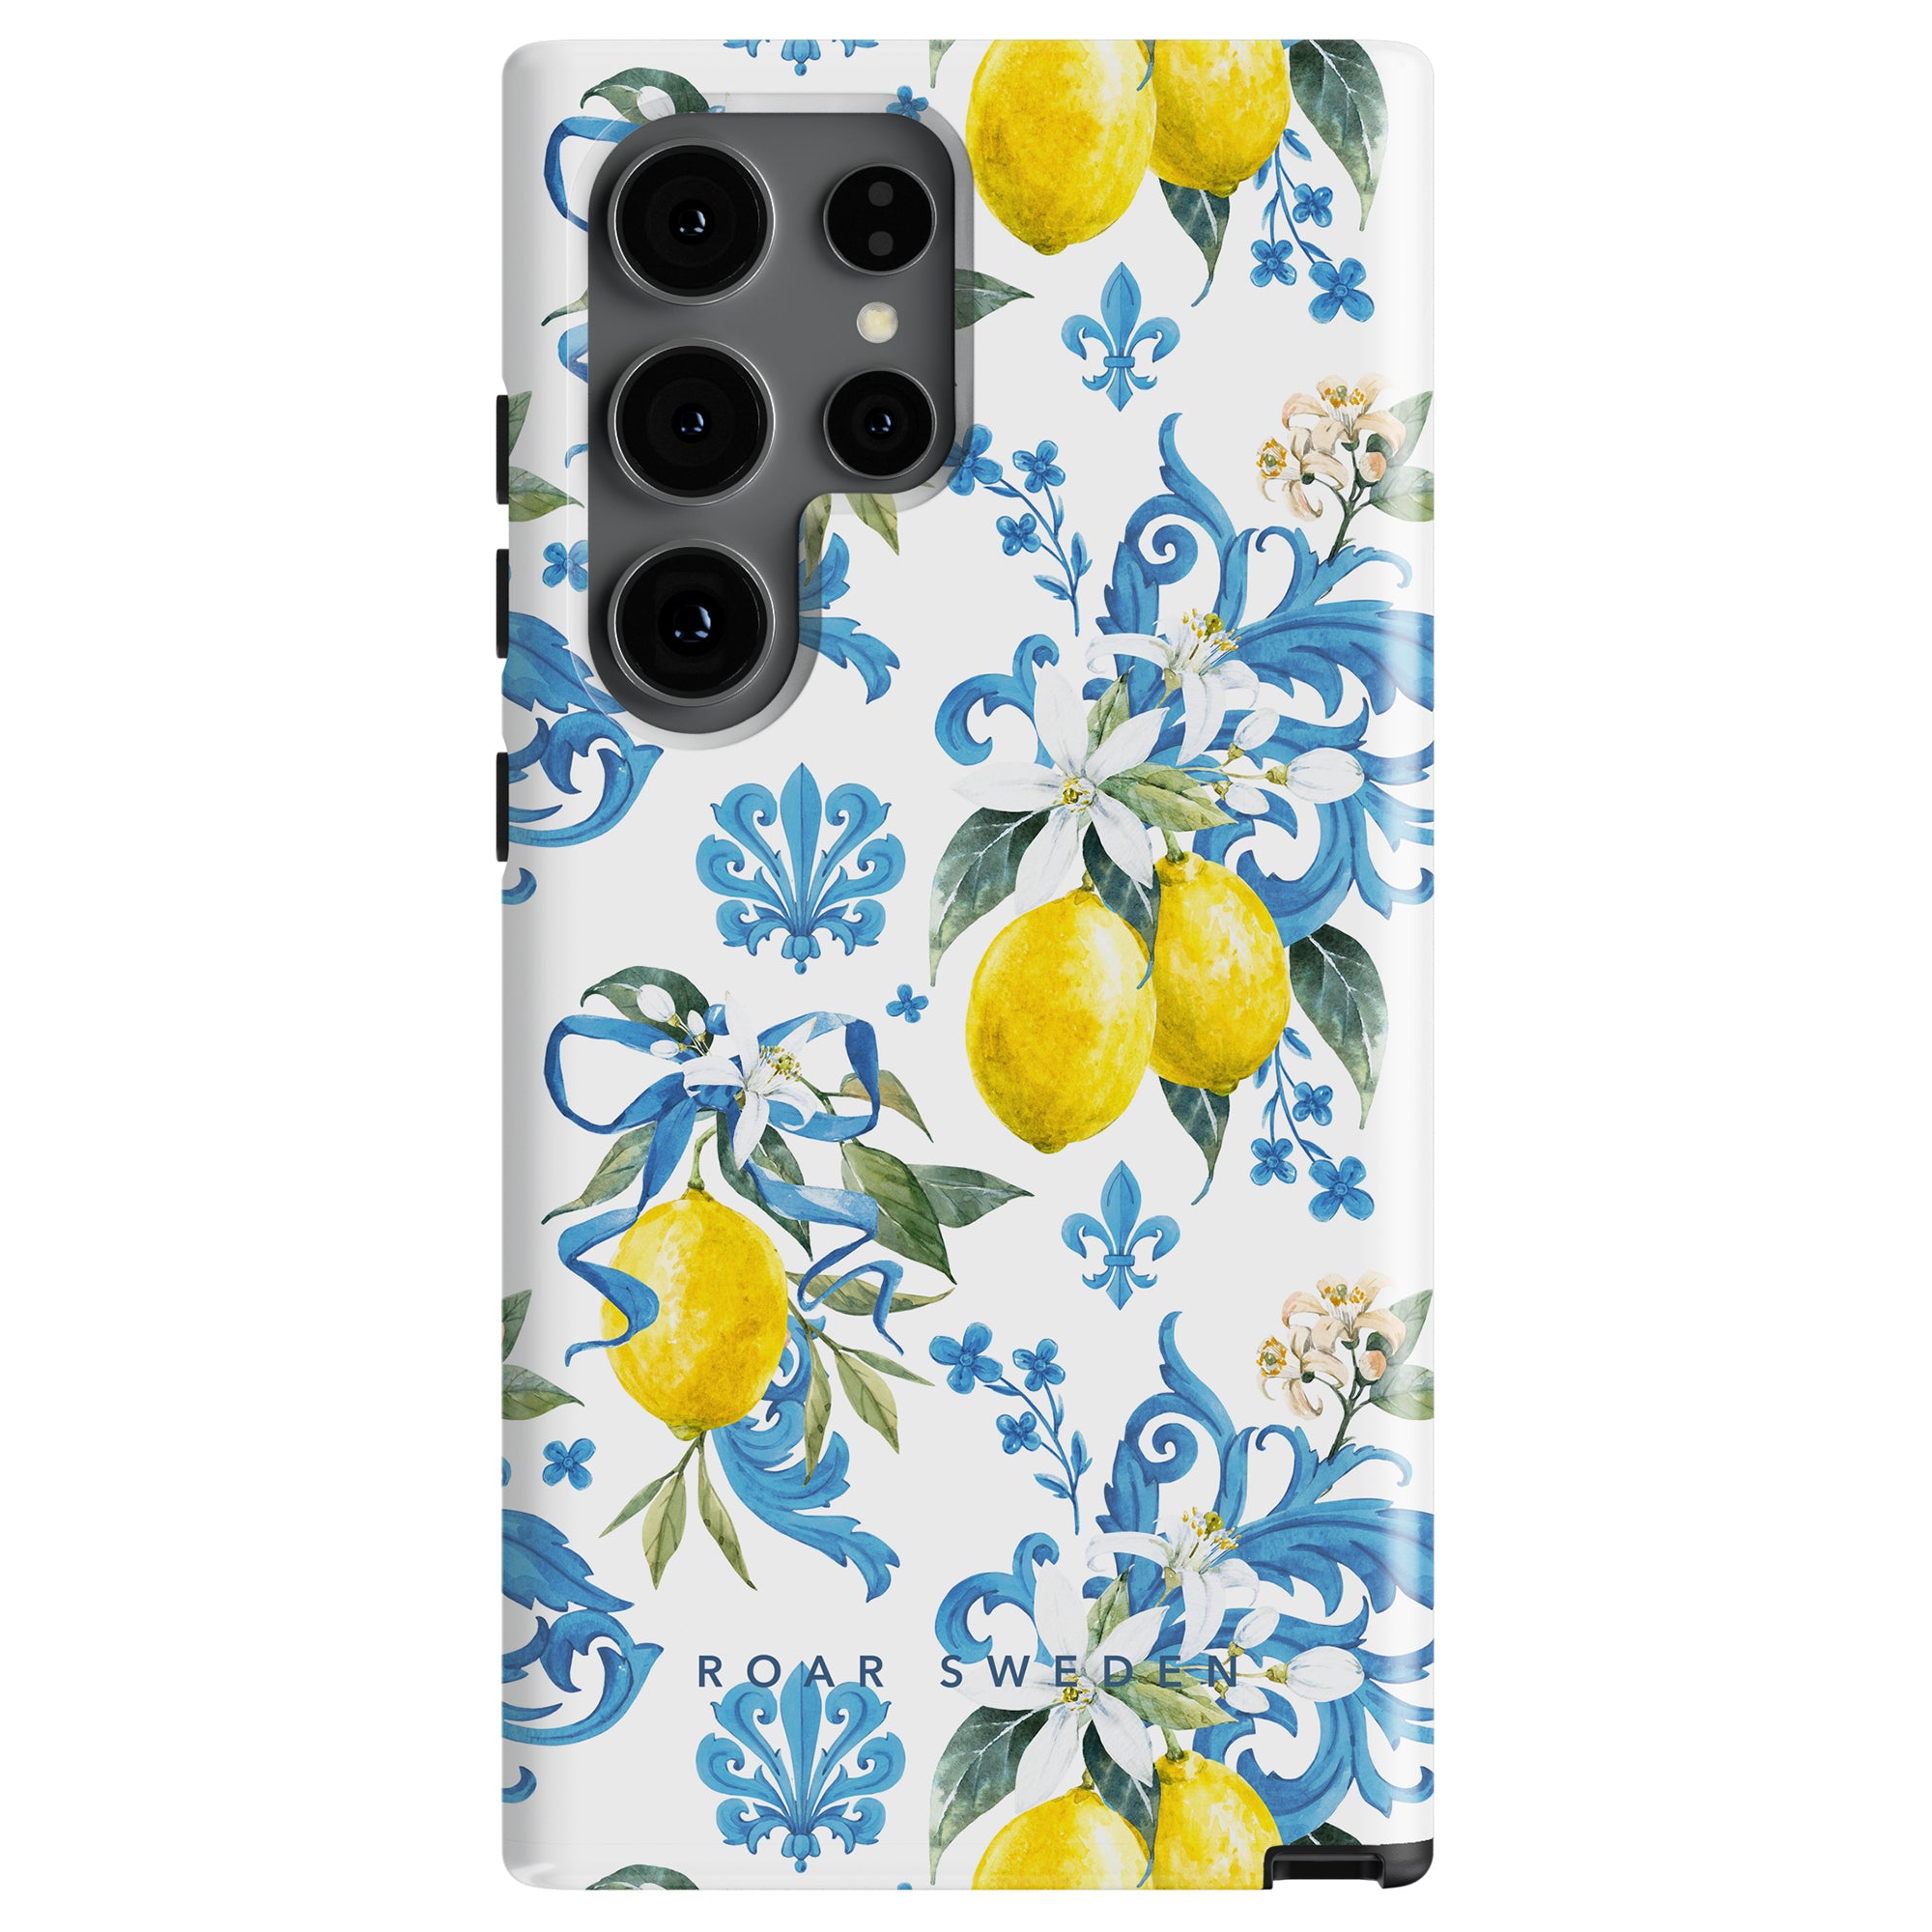 A Bianca - Tough case inspired by Sicilianska kulturen, with a floral and lemon pattern design in yellow and blue colors, featuring cutouts for camera lenses.